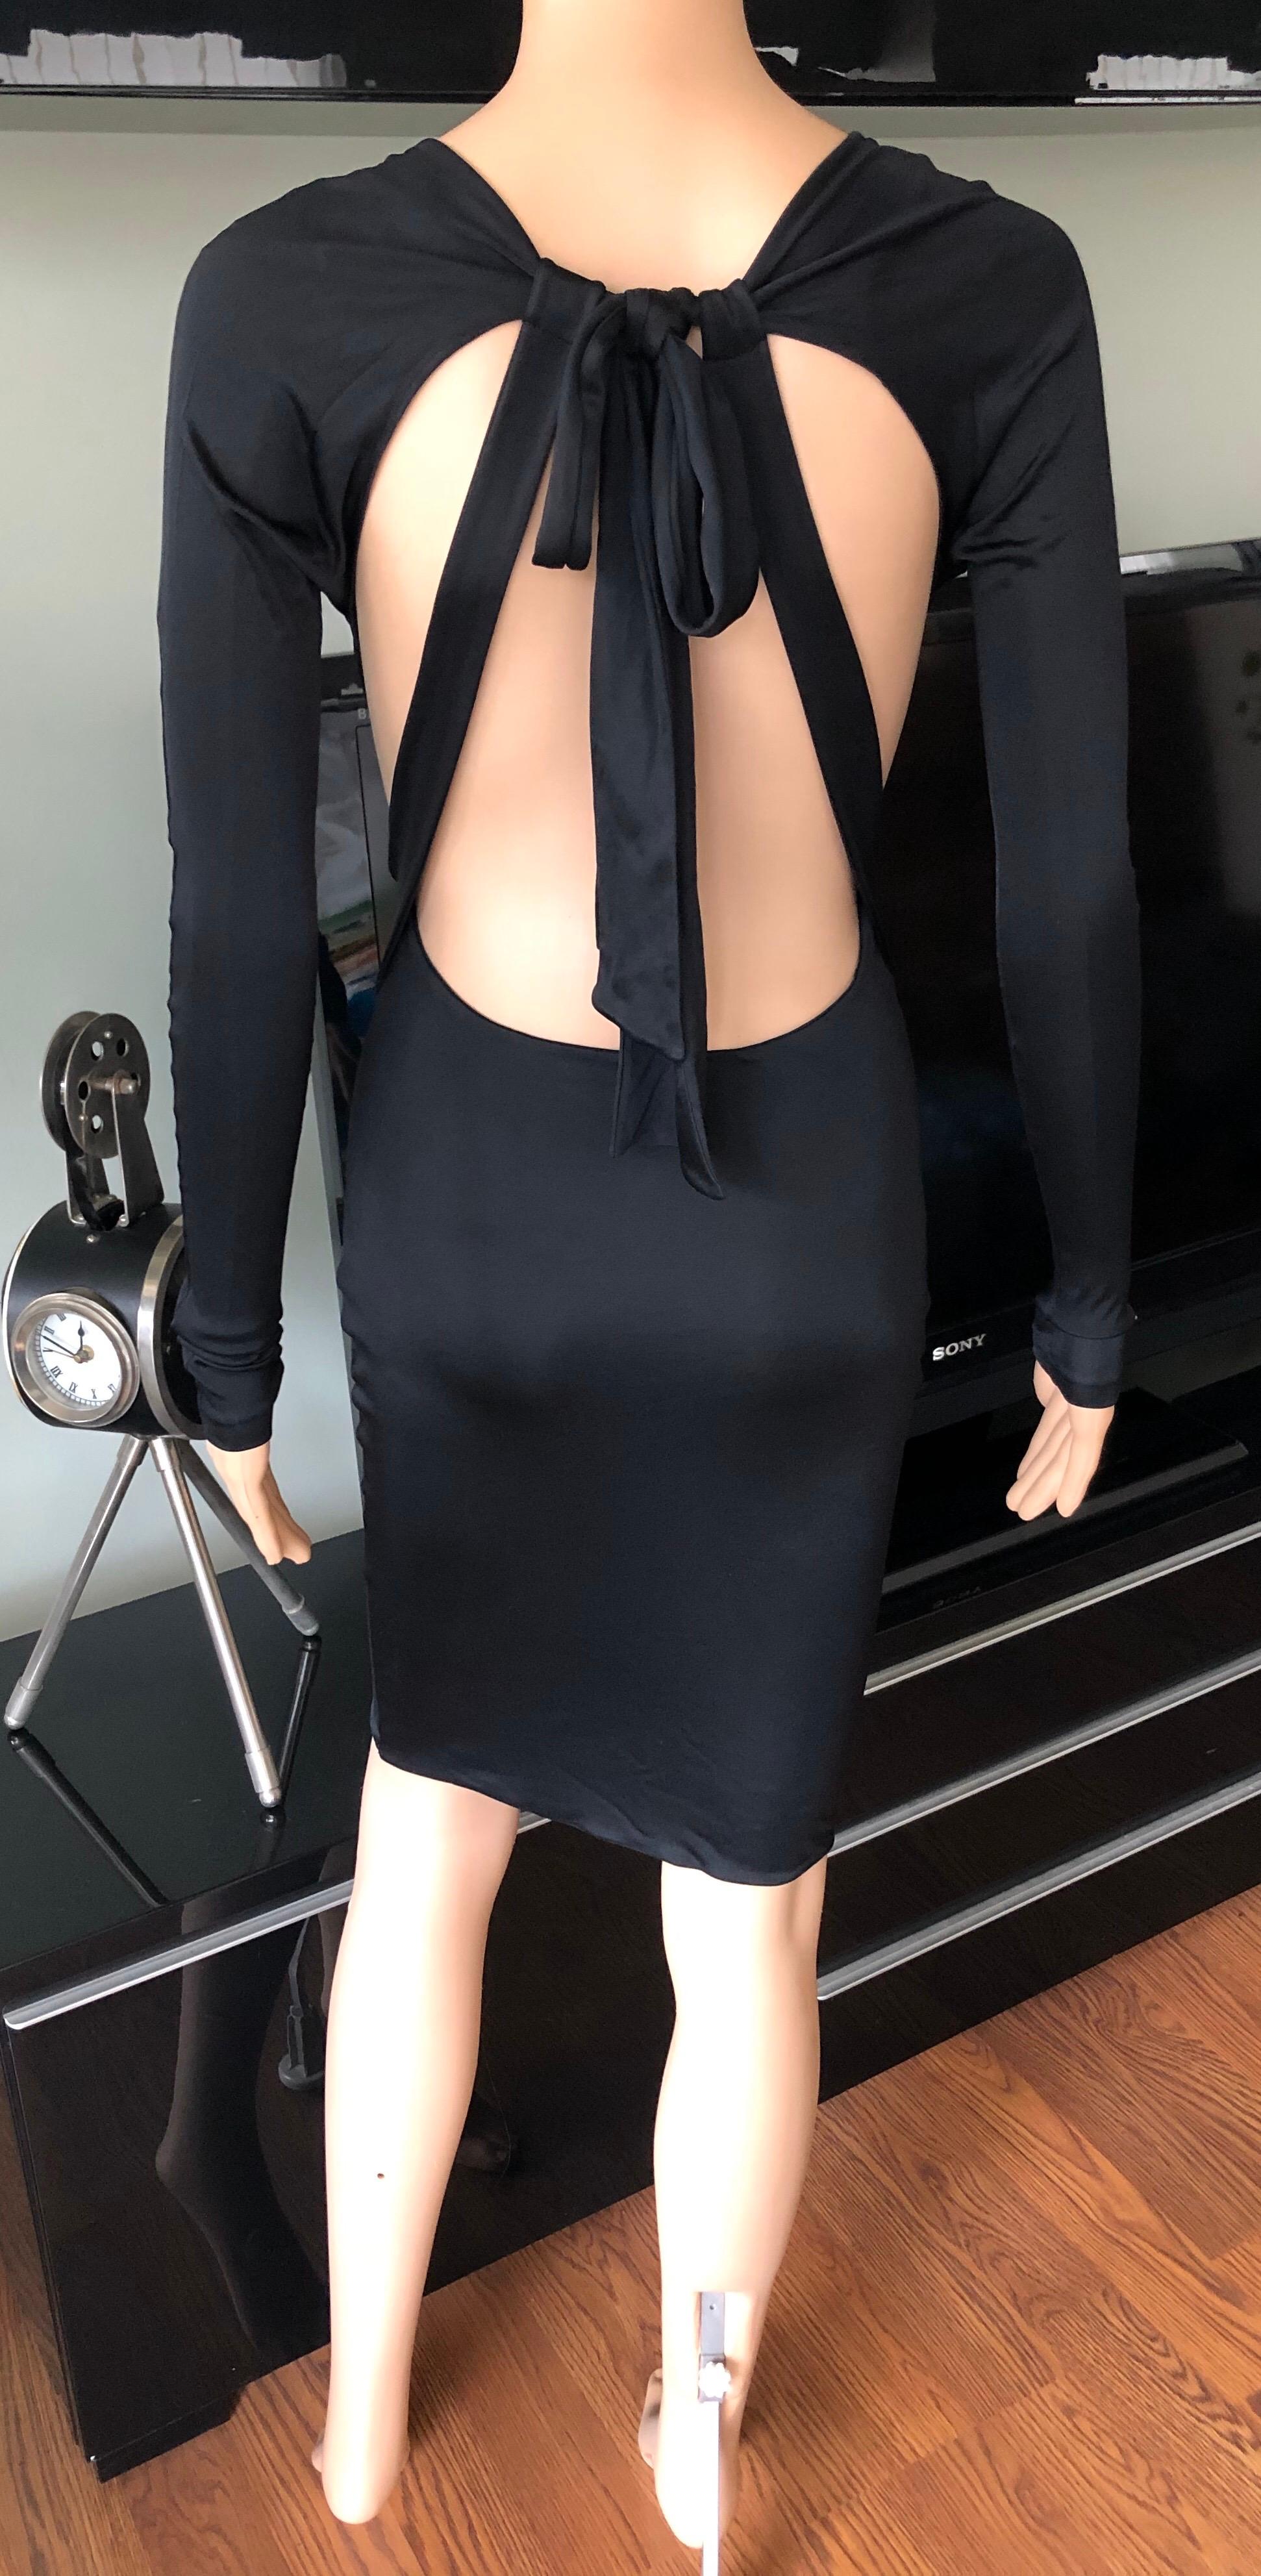 Gucci S/S 2005 Tom Ford Plunging Cutout Backless Bodycon Black Dress In Good Condition For Sale In Naples, FL